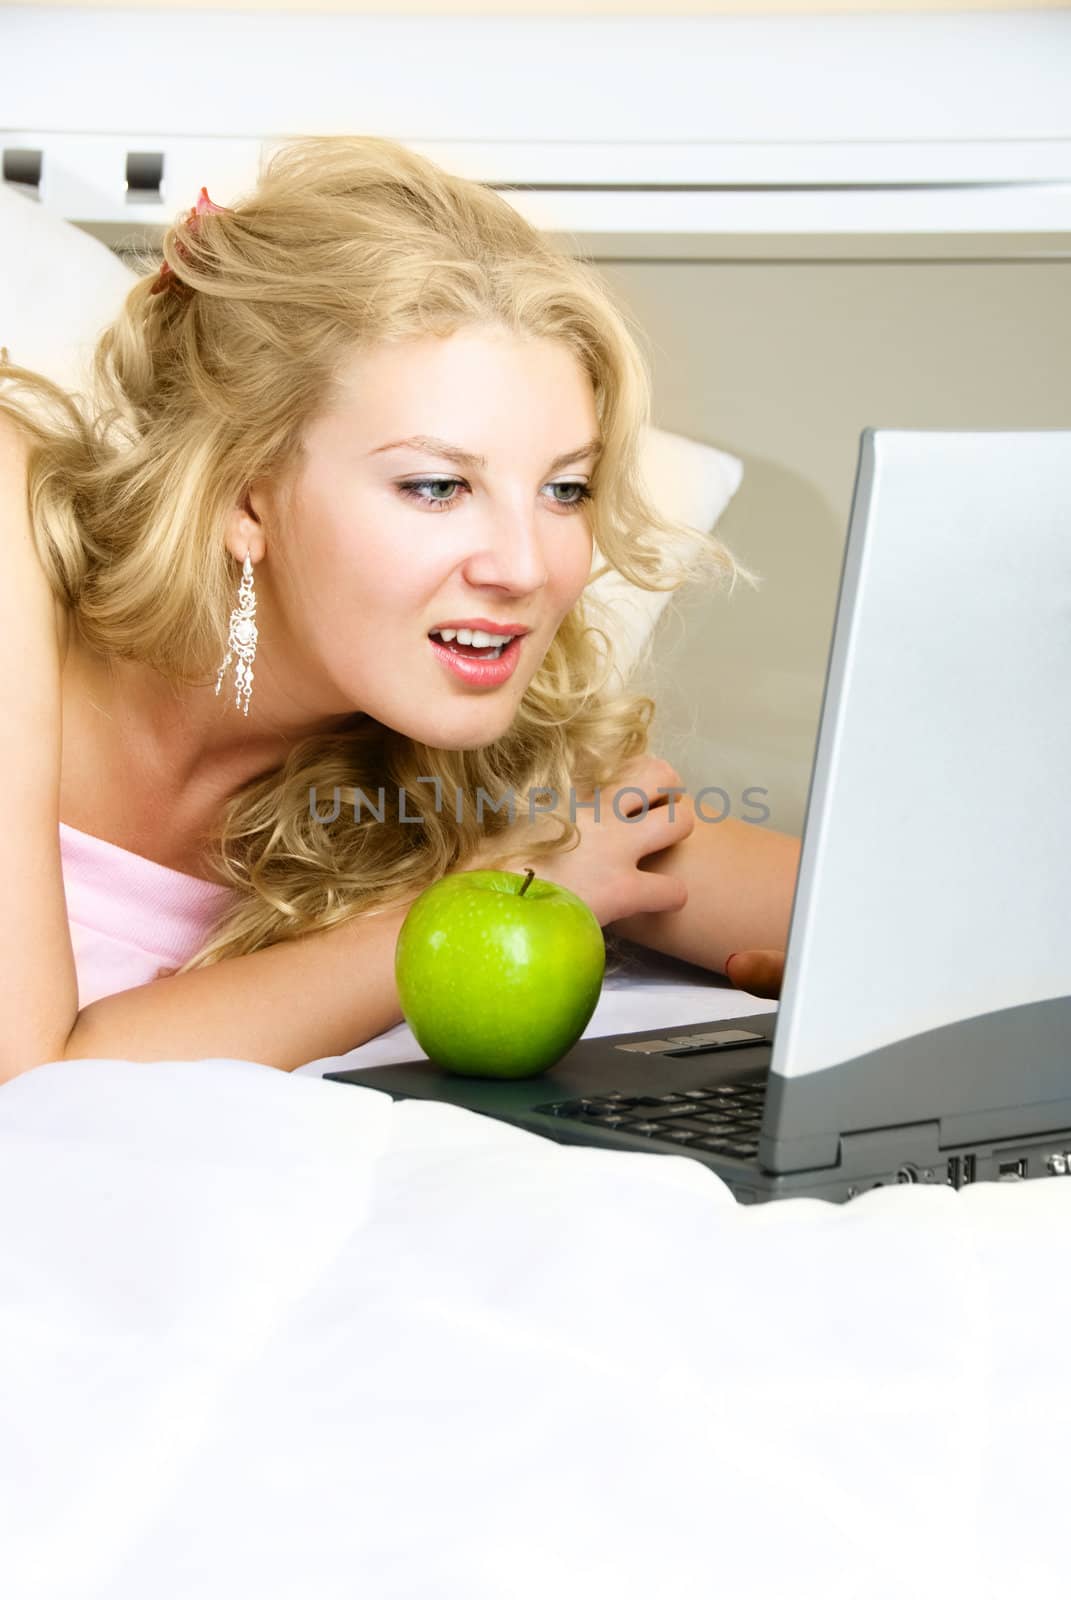 beautiful girl at home on the bed using a laptop and eating a green apple